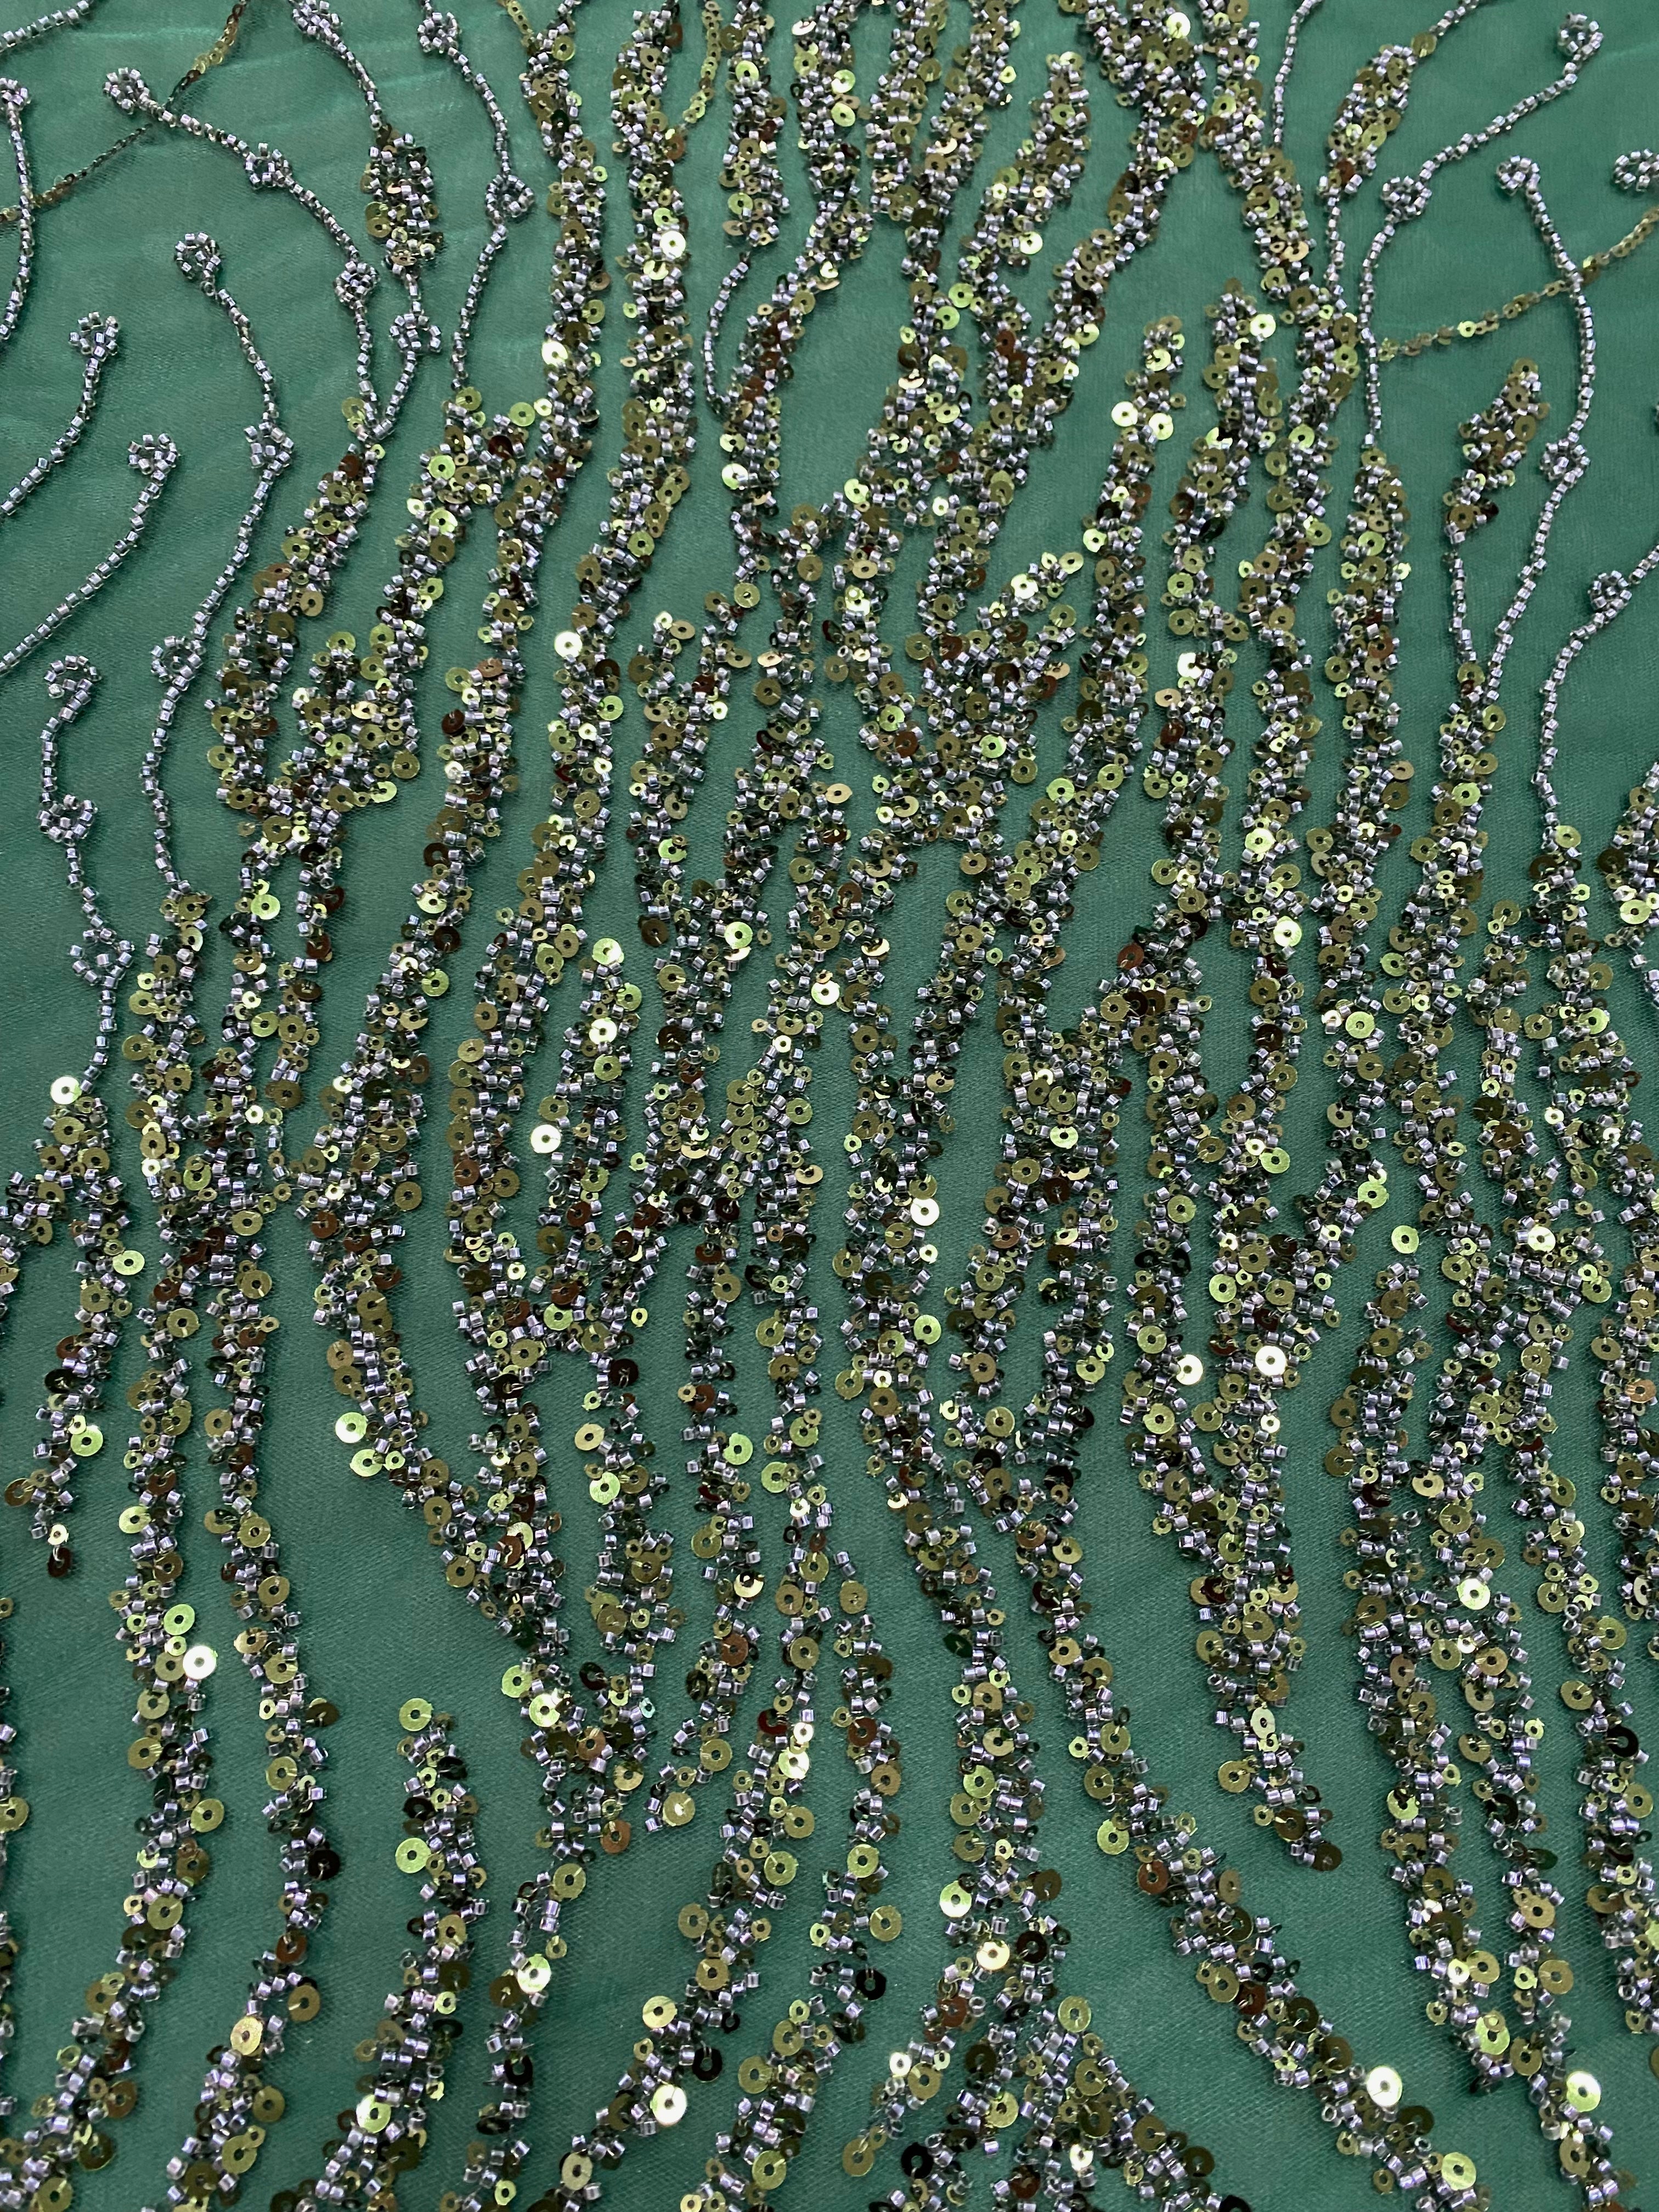 Dark Green Lace with Linear Pattern, with Beads and Sequins